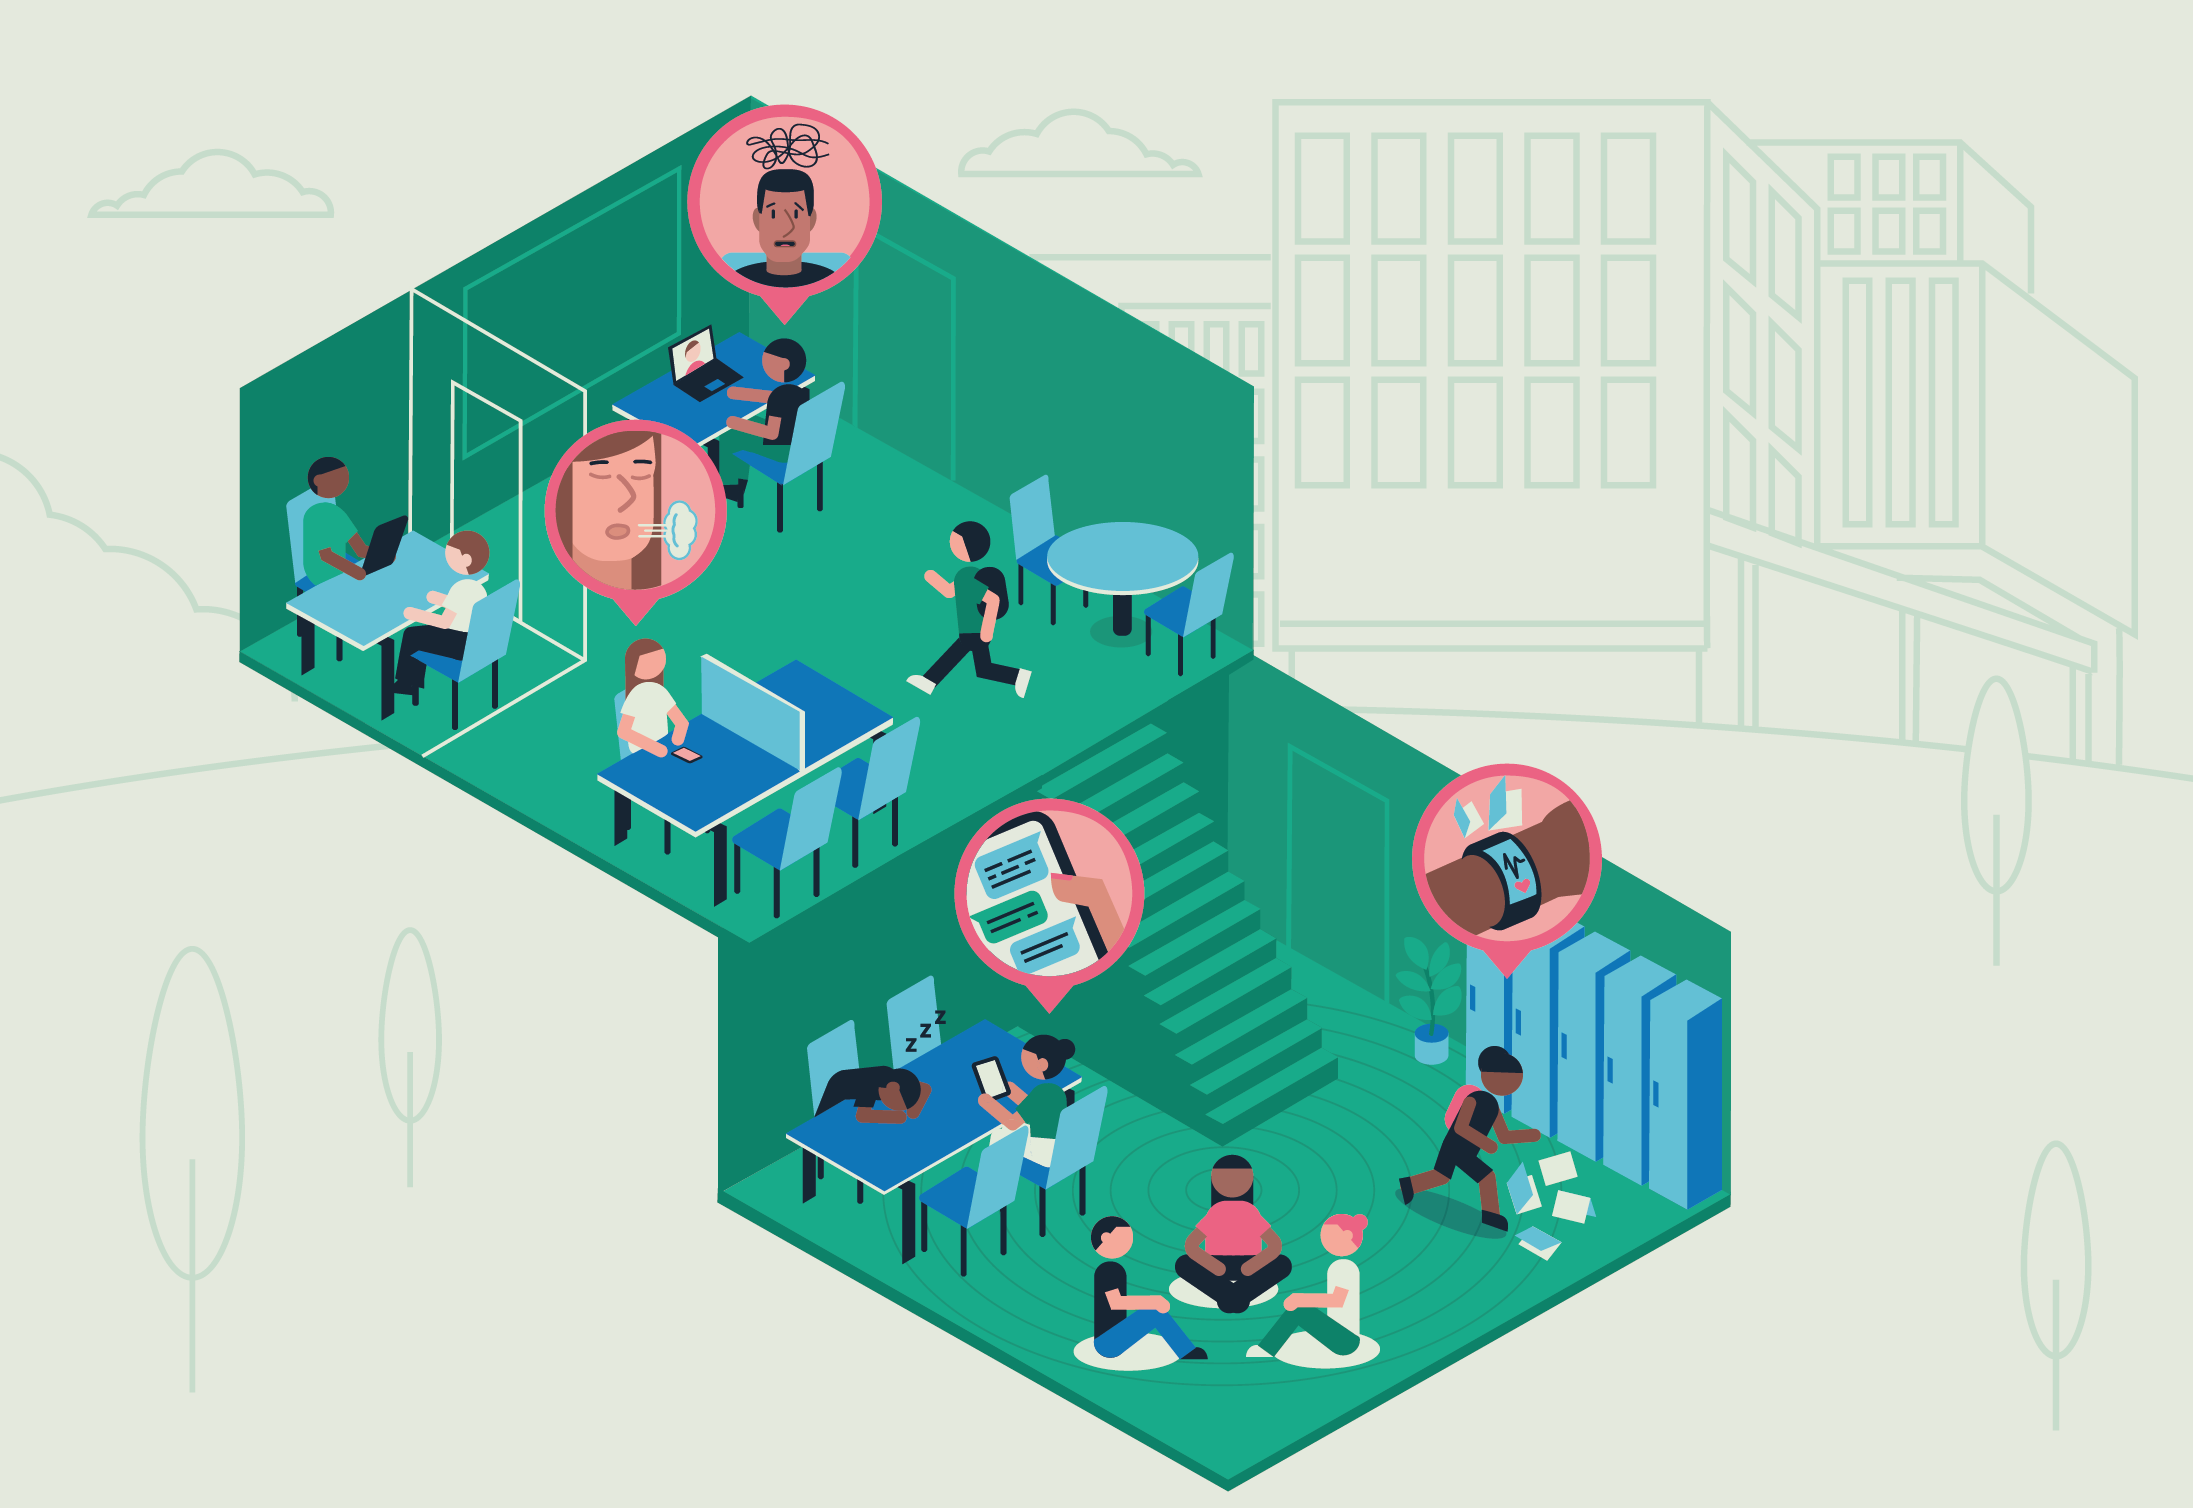 Isometric illustration of a University where students are using digital mental health technologies